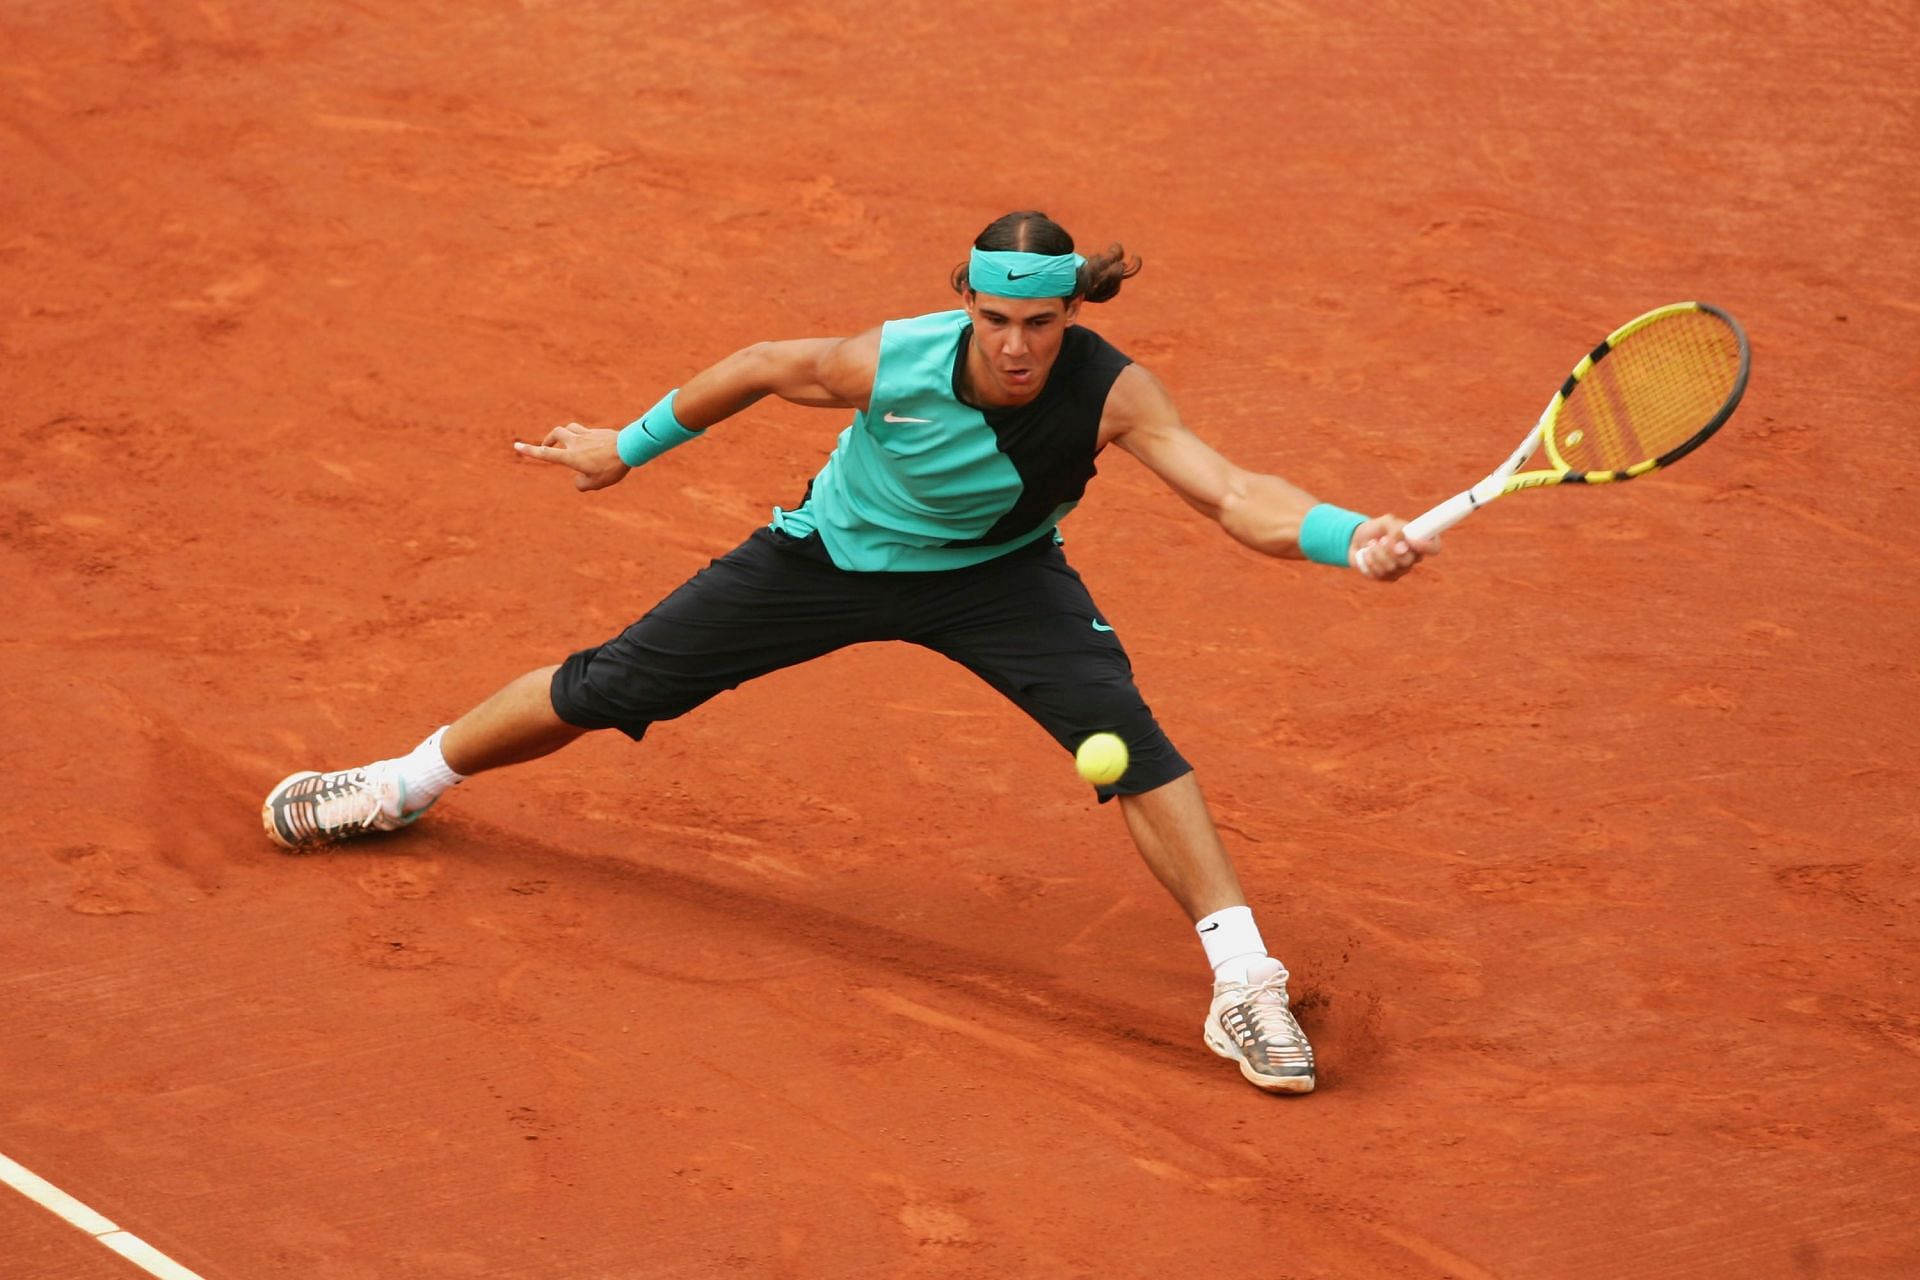 Nadal playing against Thomas Johansson at the Open Seat Godo in 2007.